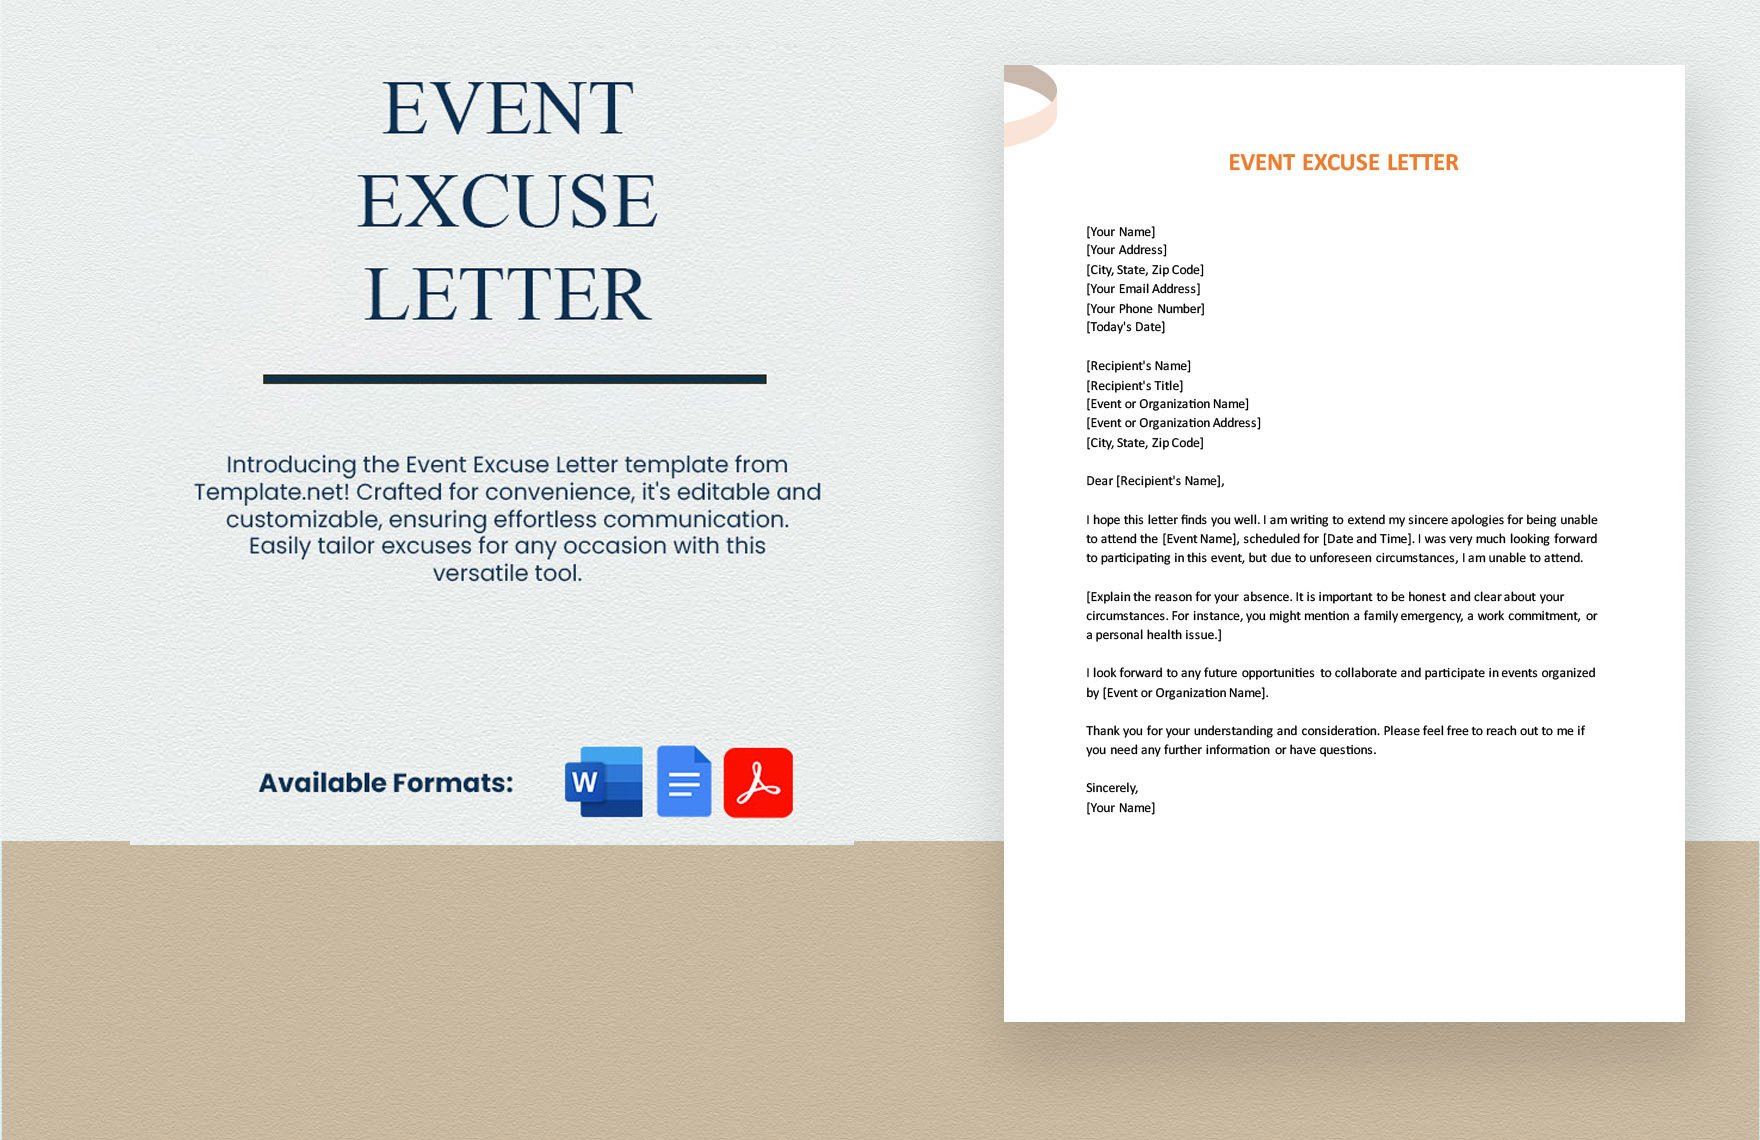 Event Excuse Letter in Word, Google Docs, PDF